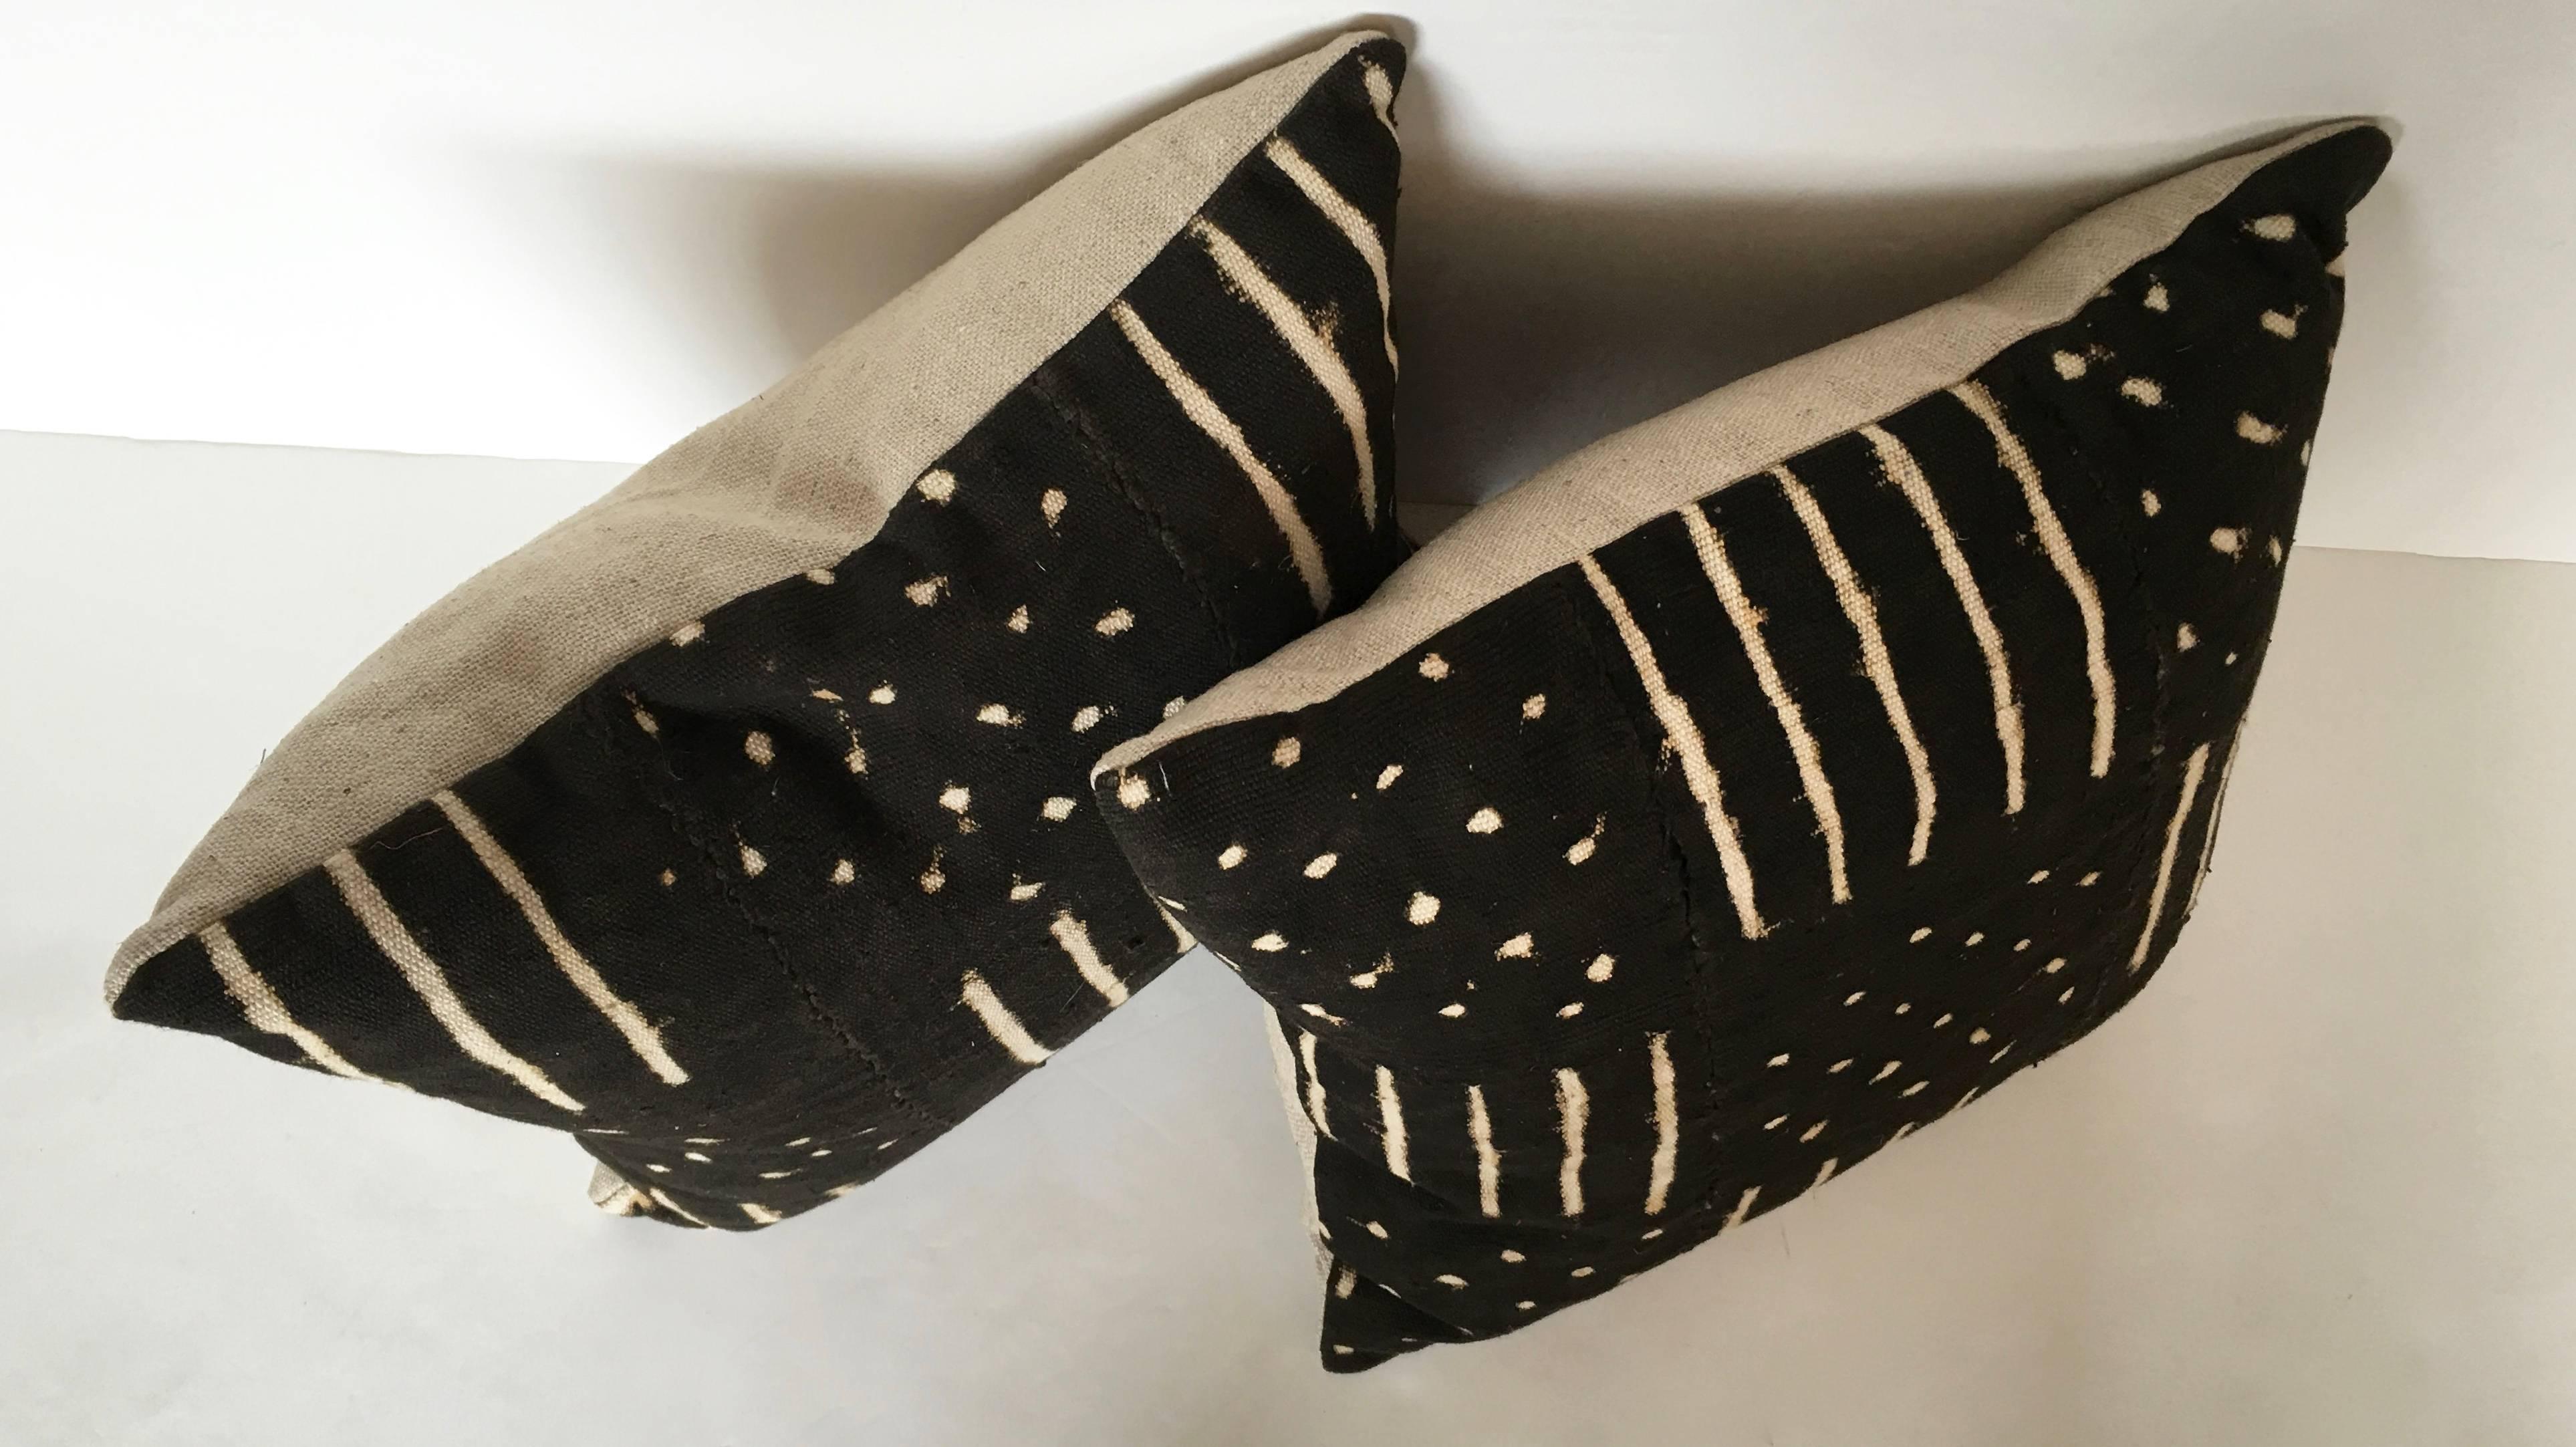 Down Handmade Black and White Graphic African Mud Cloth Pillows